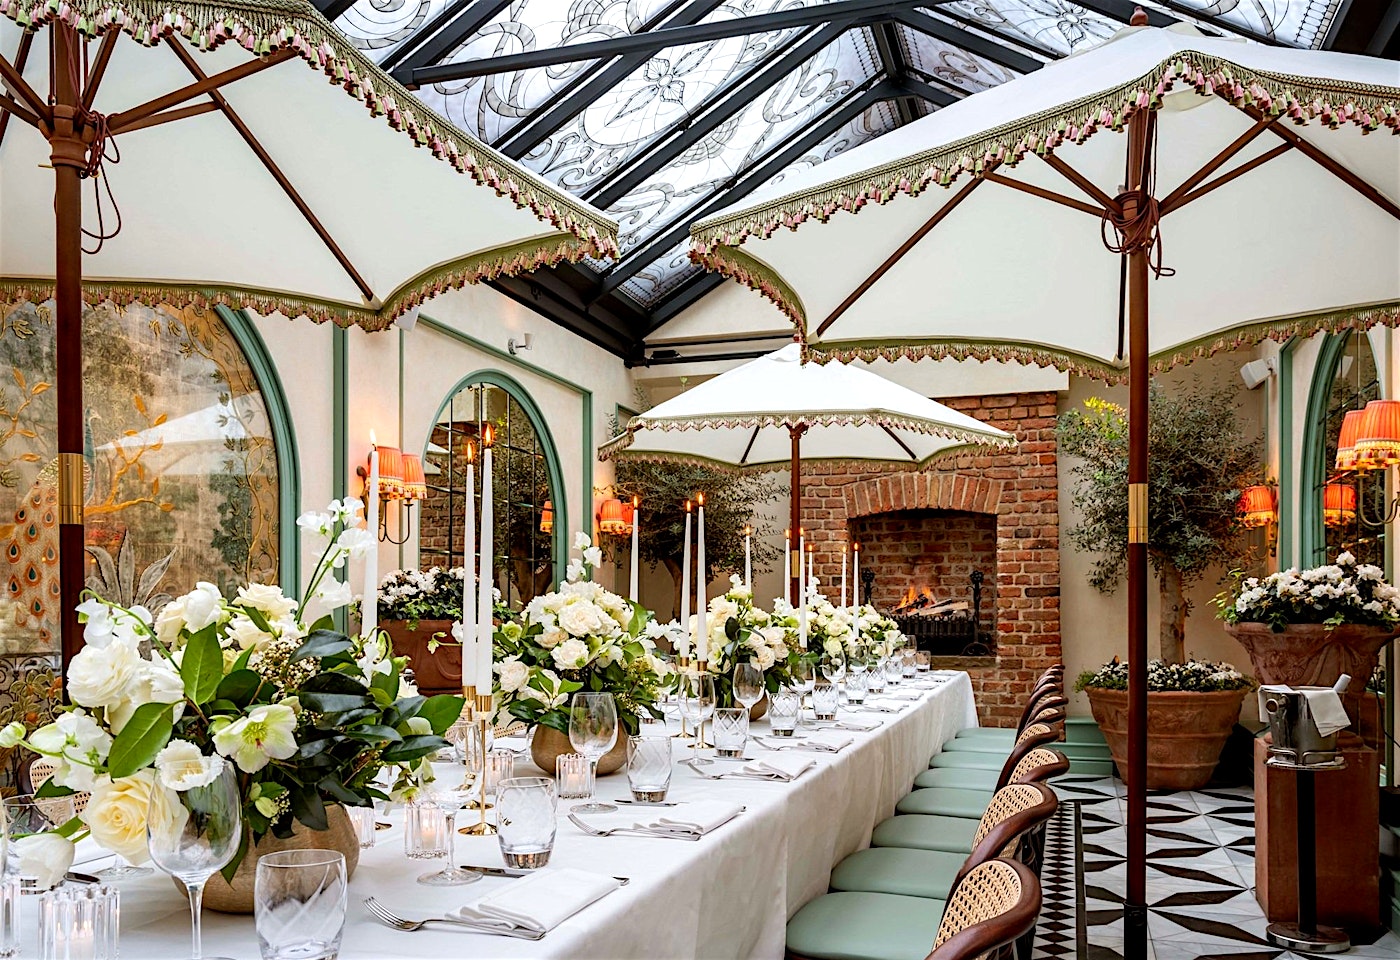 daphne's best private dining room london